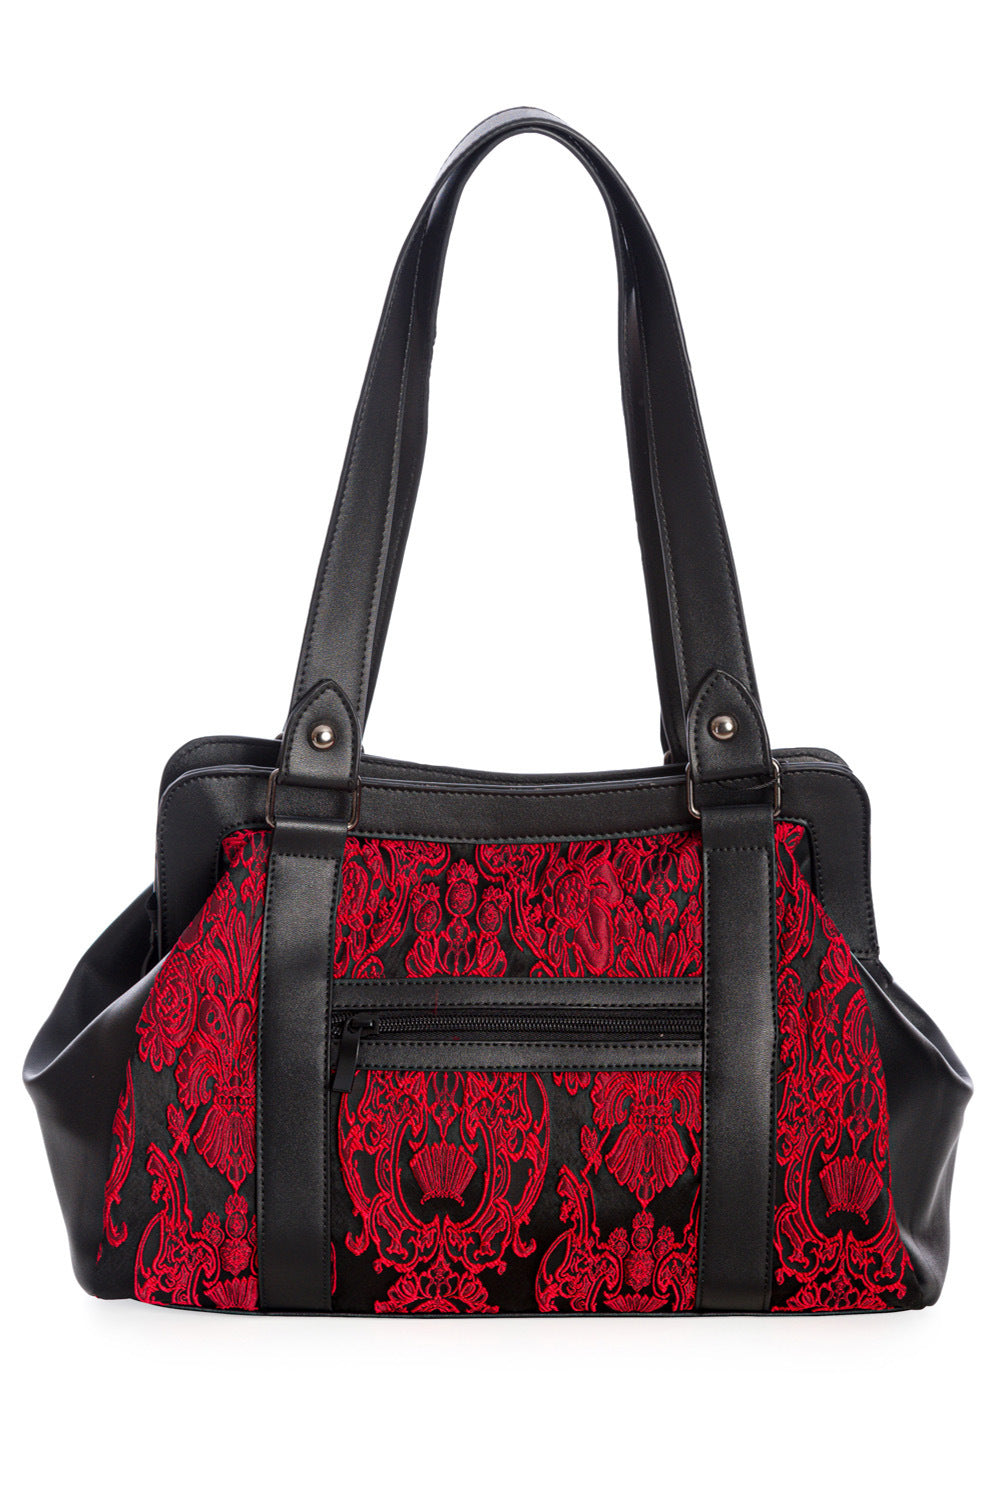 Black over the shoulder handbag in black with red lace details and corset feature to front. 